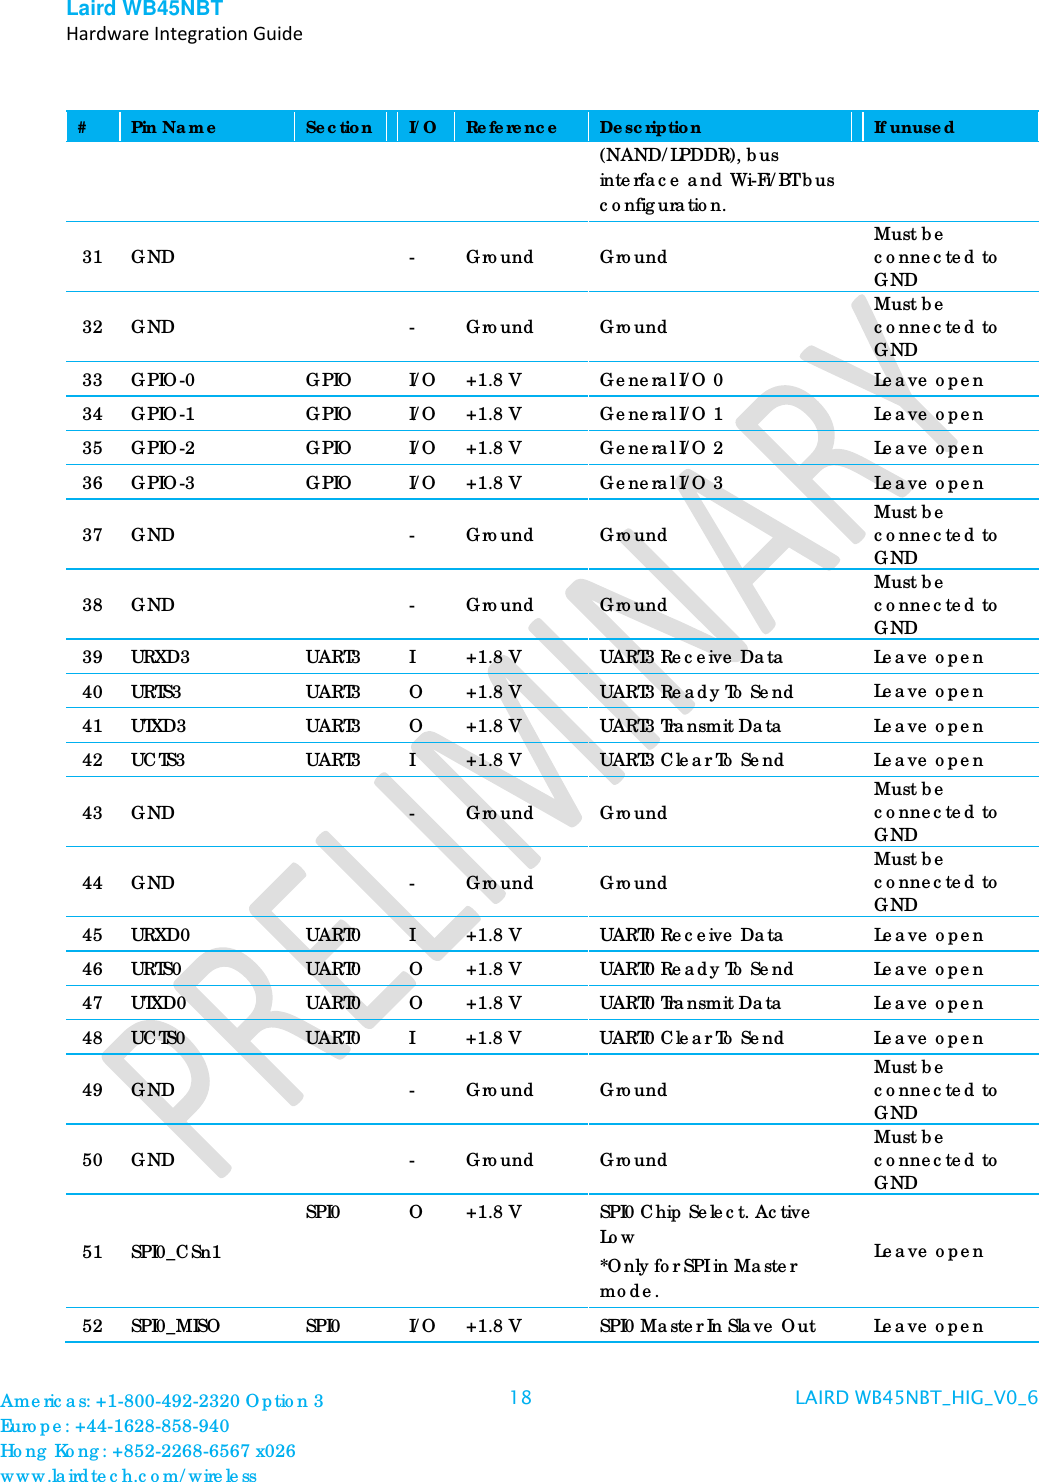 Laird WB45NBT   Hardware Integration Guide  # Pin Name Section I/O Reference Description If unused (NAND/LPDDR), bus interface and Wi-Fi/BT bus configuration. 31 GND  -  Ground Ground Must be connected to GND 32 GND  -  Ground Ground Must be connected to GND 33 GPIO-0  GPIO I/O +1.8 V  General I/O 0 Leave open 34 GPIO-1  GPIO I/O +1.8 V  General I/O 1 Leave open 35 GPIO-2  GPIO I/O +1.8 V  General I/O 2 Leave open 36 GPIO-3  GPIO I/O +1.8 V  General I/O 3  Leave open 37 GND  -  Ground Ground Must be connected to GND 38 GND  -  Ground Ground Must be connected to GND 39 URXD3 UART3  I  +1.8 V  UART3 Receive Data Leave open 40 URTS3 UART3  O  +1.8 V  UART3 Ready To Send  Leave open 41 UTXD3 UART3  O  +1.8 V  UART3 Transmit Data Leave open 42 UCTS3 UART3  I  +1.8 V  UART3 Clear To Send Leave open 43 GND  -  Ground Ground Must be connected to GND 44 GND  -  Ground Ground Must be connected to GND 45 URXD0  UART0  I  +1.8 V  UART0 Receive Data Leave open 46 URTS0  UART0  O  +1.8 V  UART0 Ready To Send  Leave open 47 UTXD0  UART0  O  +1.8 V  UART0 Transmit Data Leave open 48 UCTS0  UART0  I  +1.8 V  UART0 Clear To Send Leave open 49 GND  -  Ground Ground Must be connected to GND 50 GND  -  Ground Ground Must be connected to GND 51 SPI0_CSn1 SPI0  O  +1.8 V  SPI0 Chip Select. Active Low *Only for SPI in Master mode. Leave open 52 SPI0_MISO SPI0 I/O +1.8 V  SPI0 Master In Slave Out Leave open Americas: +1-800-492-2320 Option 3 Europe: +44-1628-858-940 Hong Kong: +852-2268-6567 x026 www.lairdtech.com/wireless 18 LAIRD WB45NBT_HIG_V0_6   